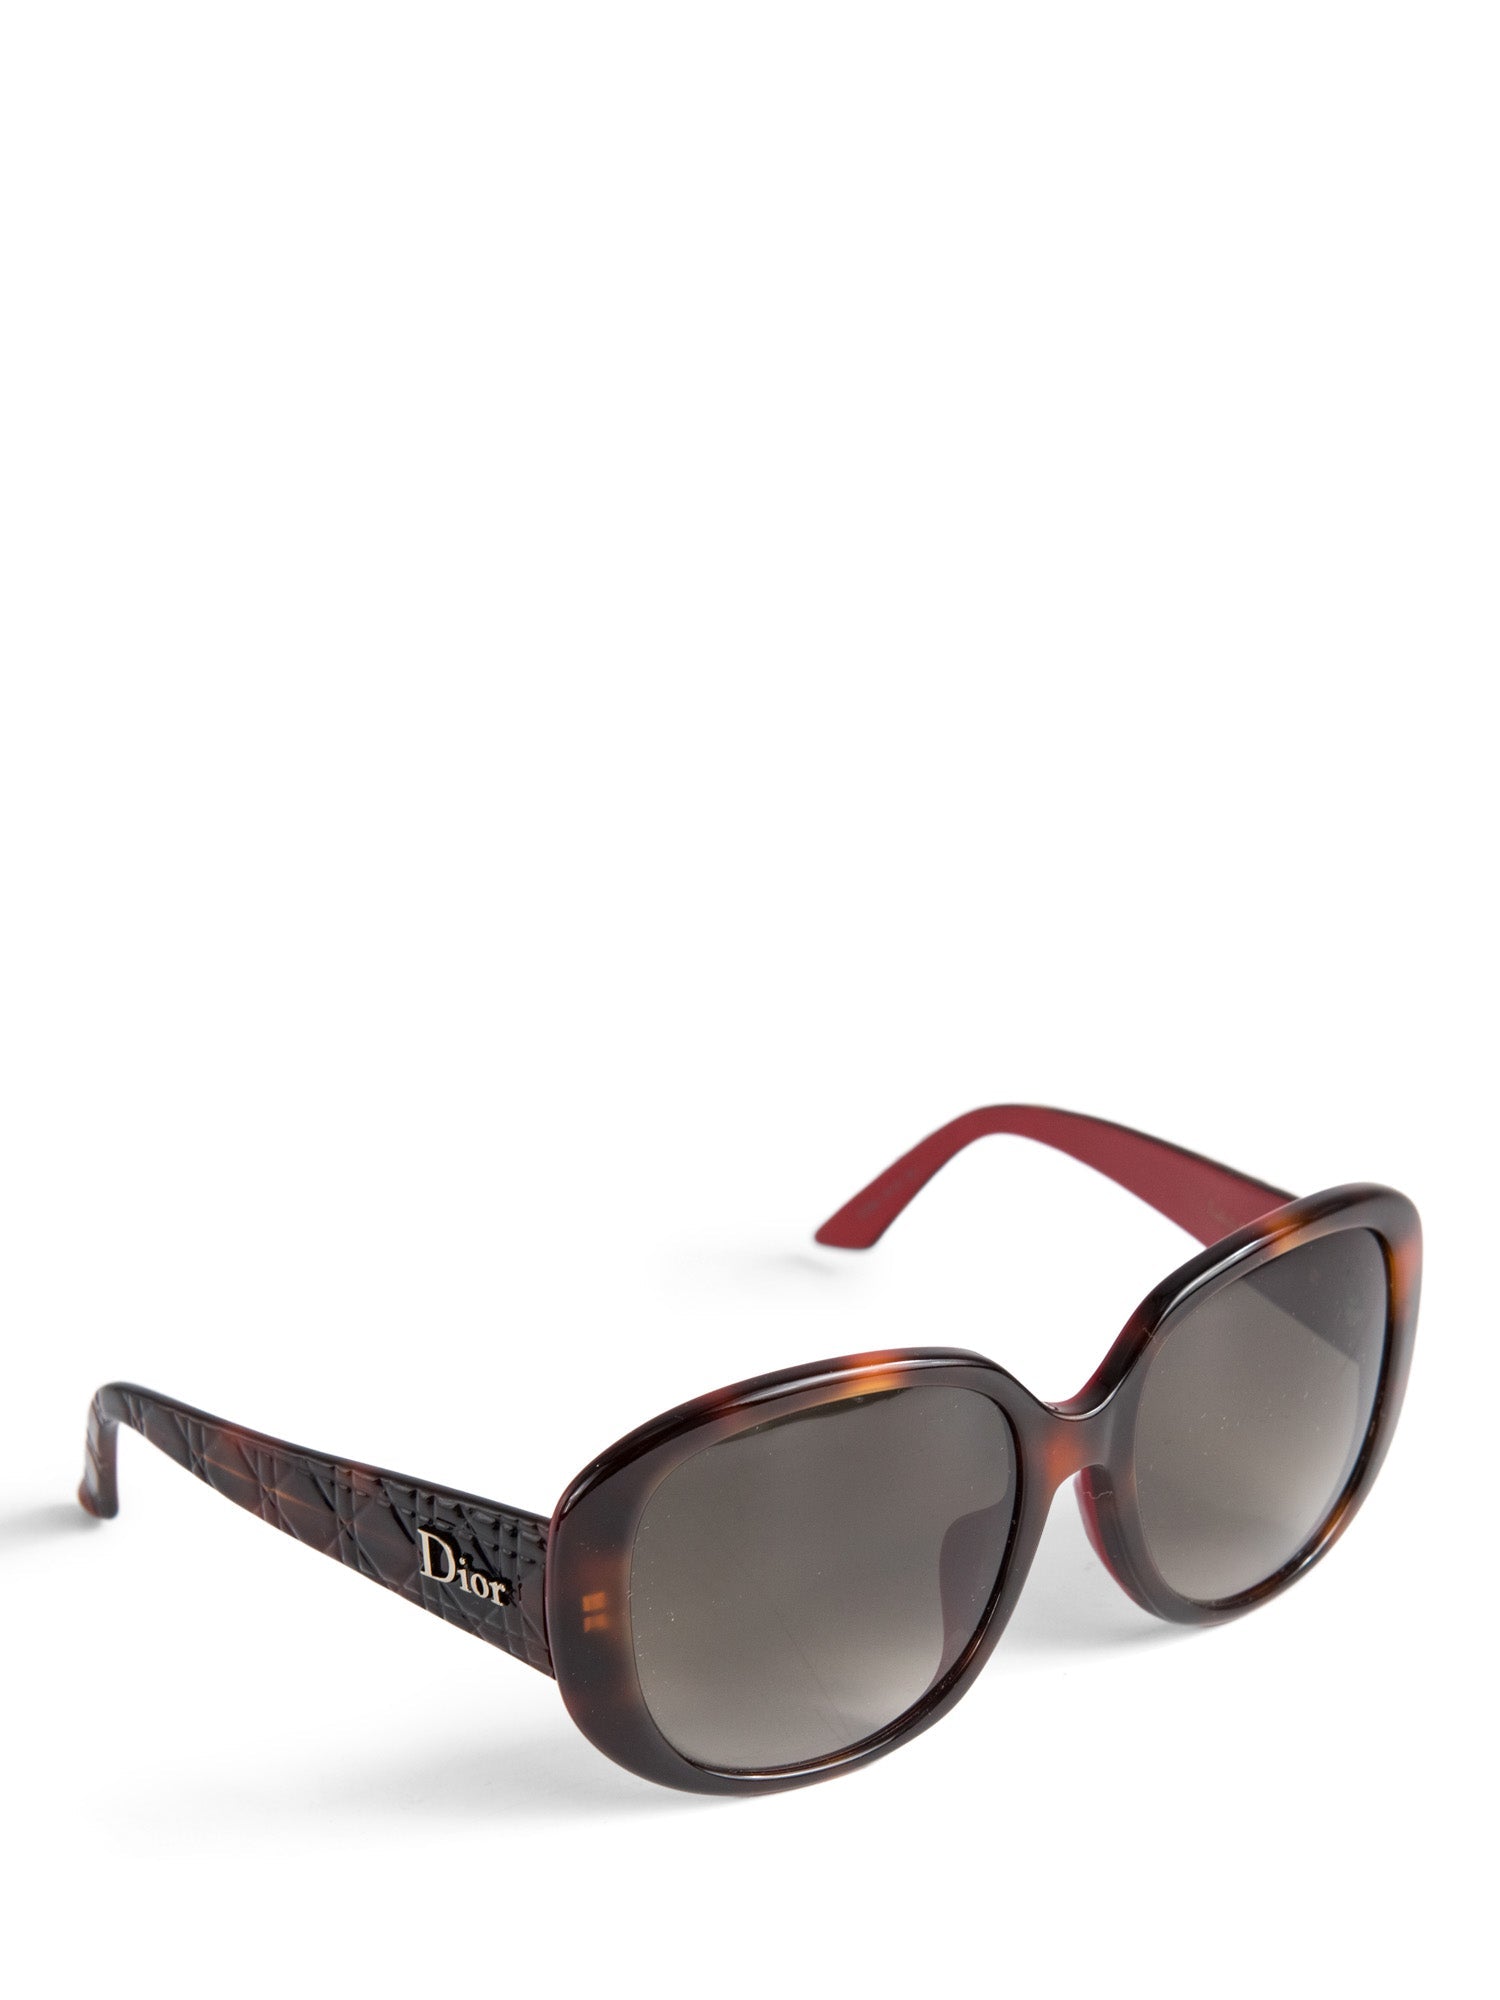 Christian Dior Logo Cannage Sunglasses Brown Red